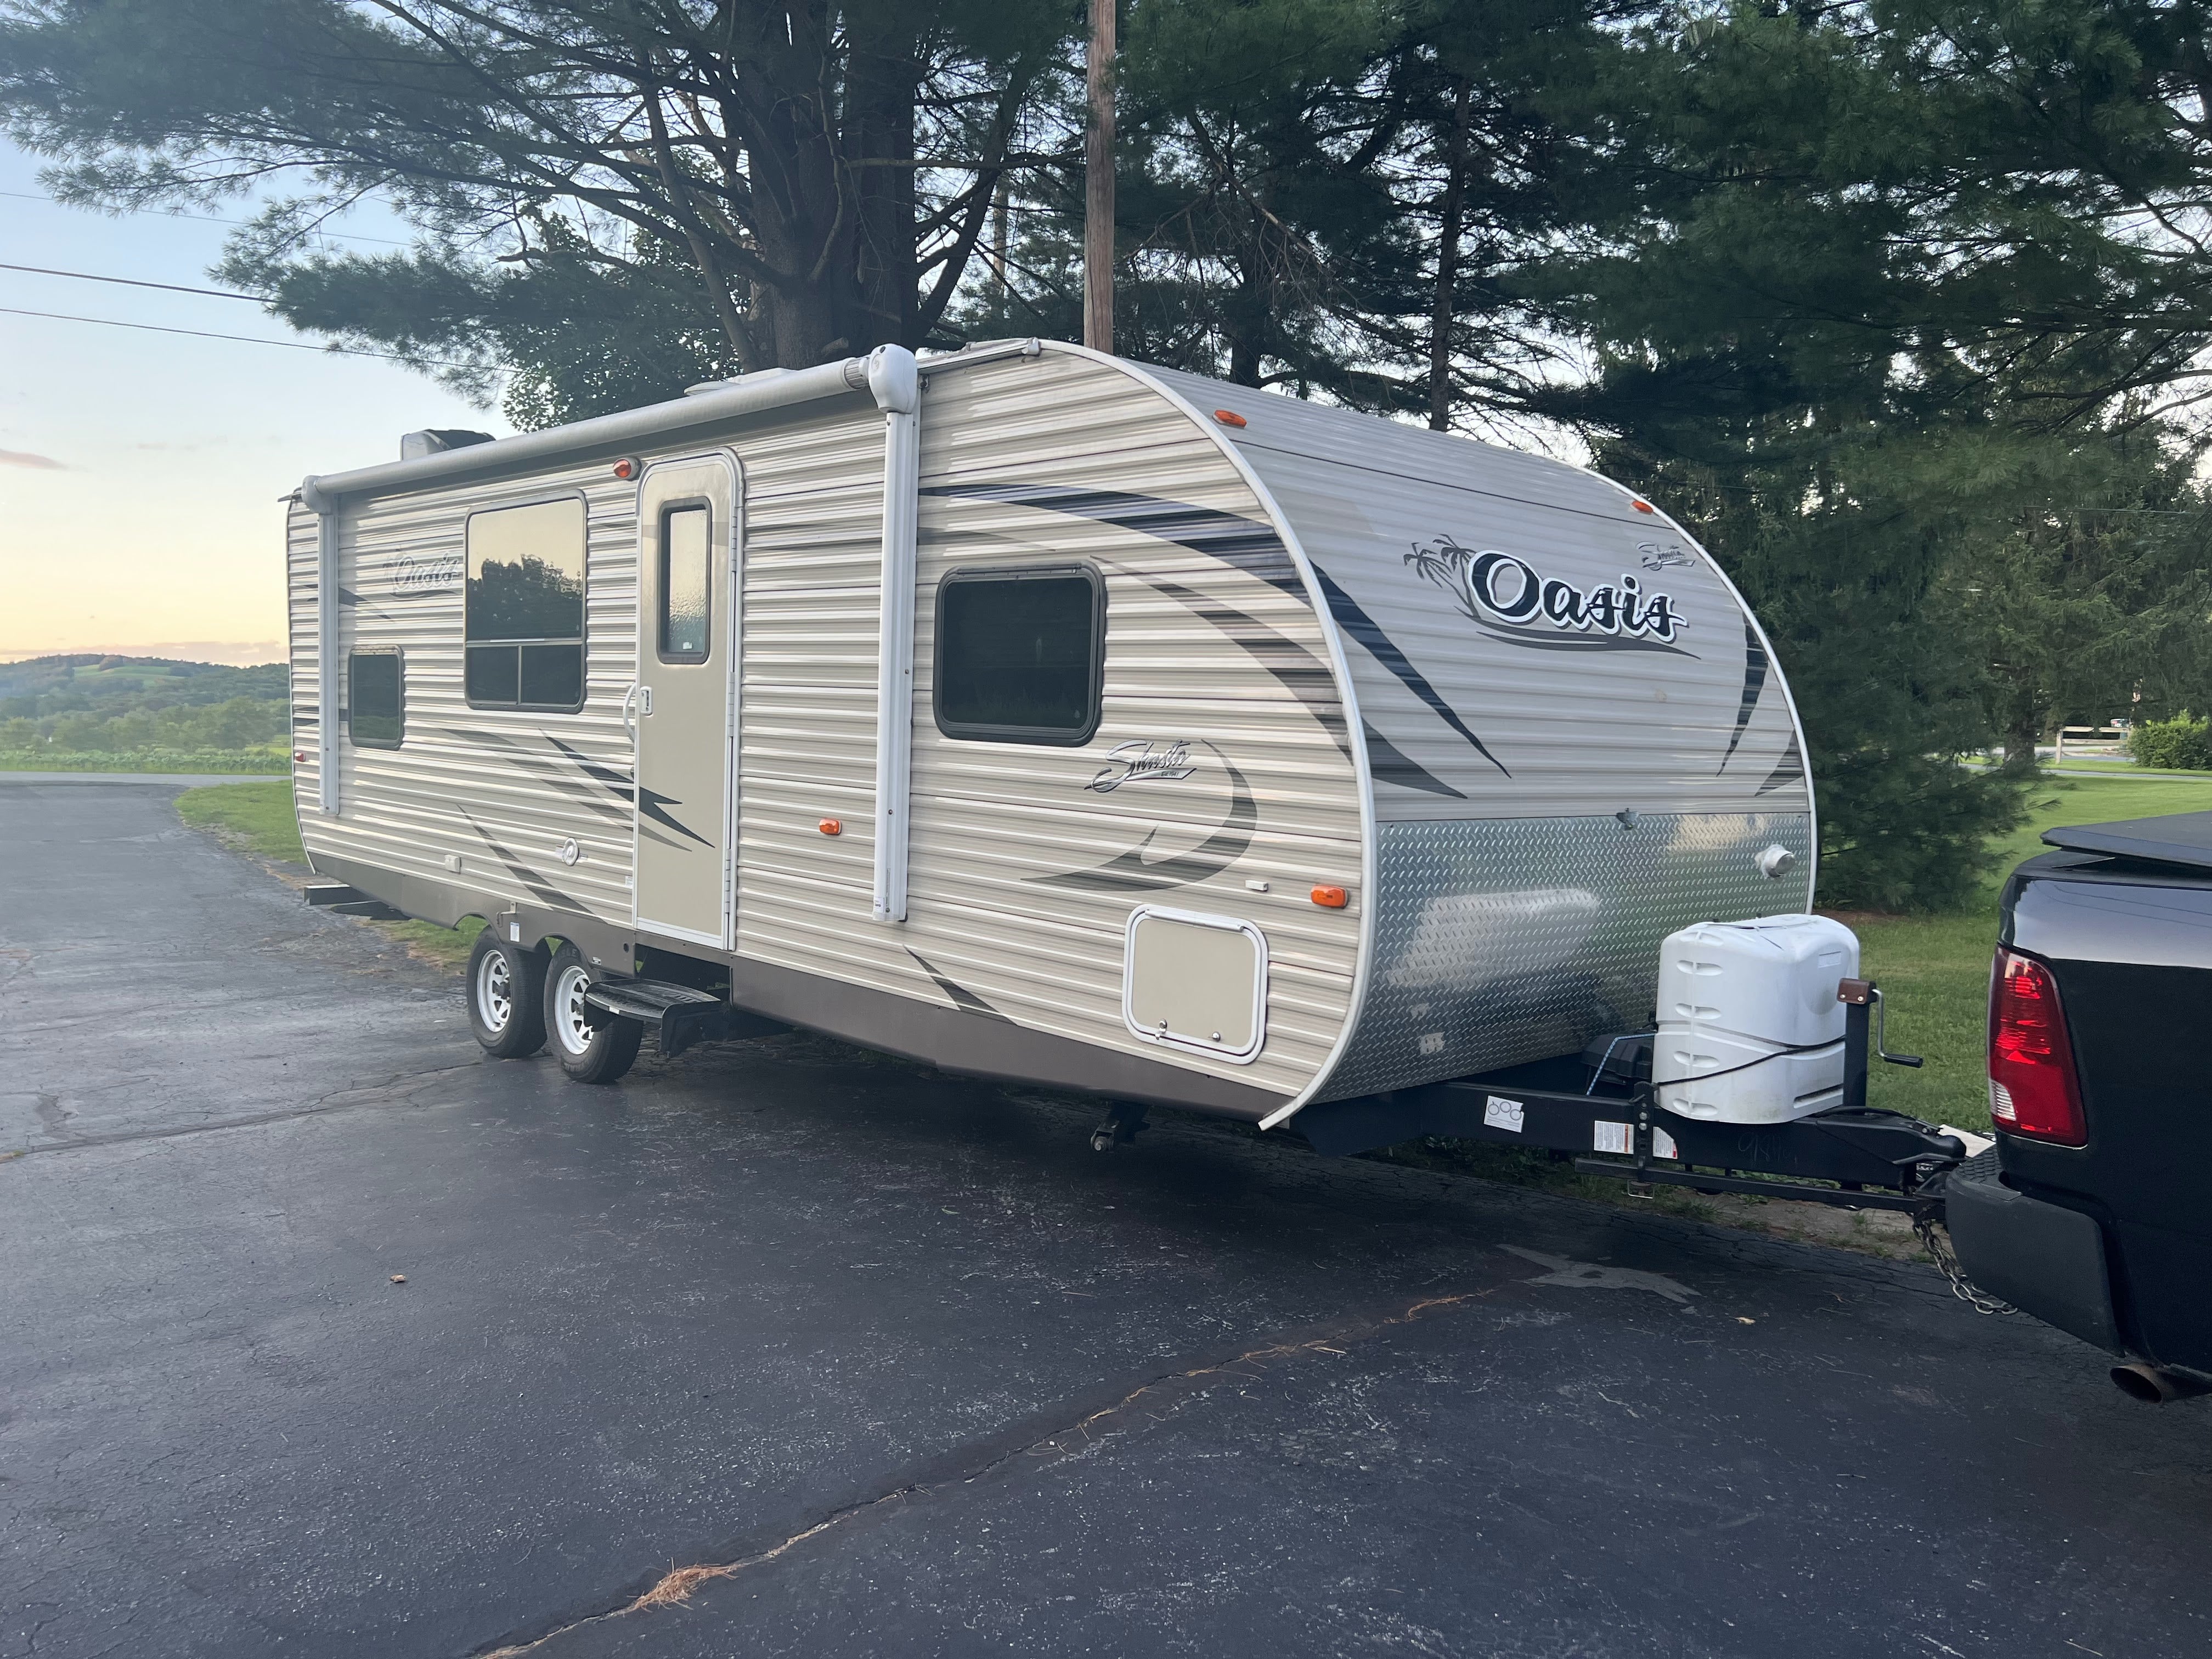 2017 Shasta Oasis 25RS for Rental at 84 RV Rentals